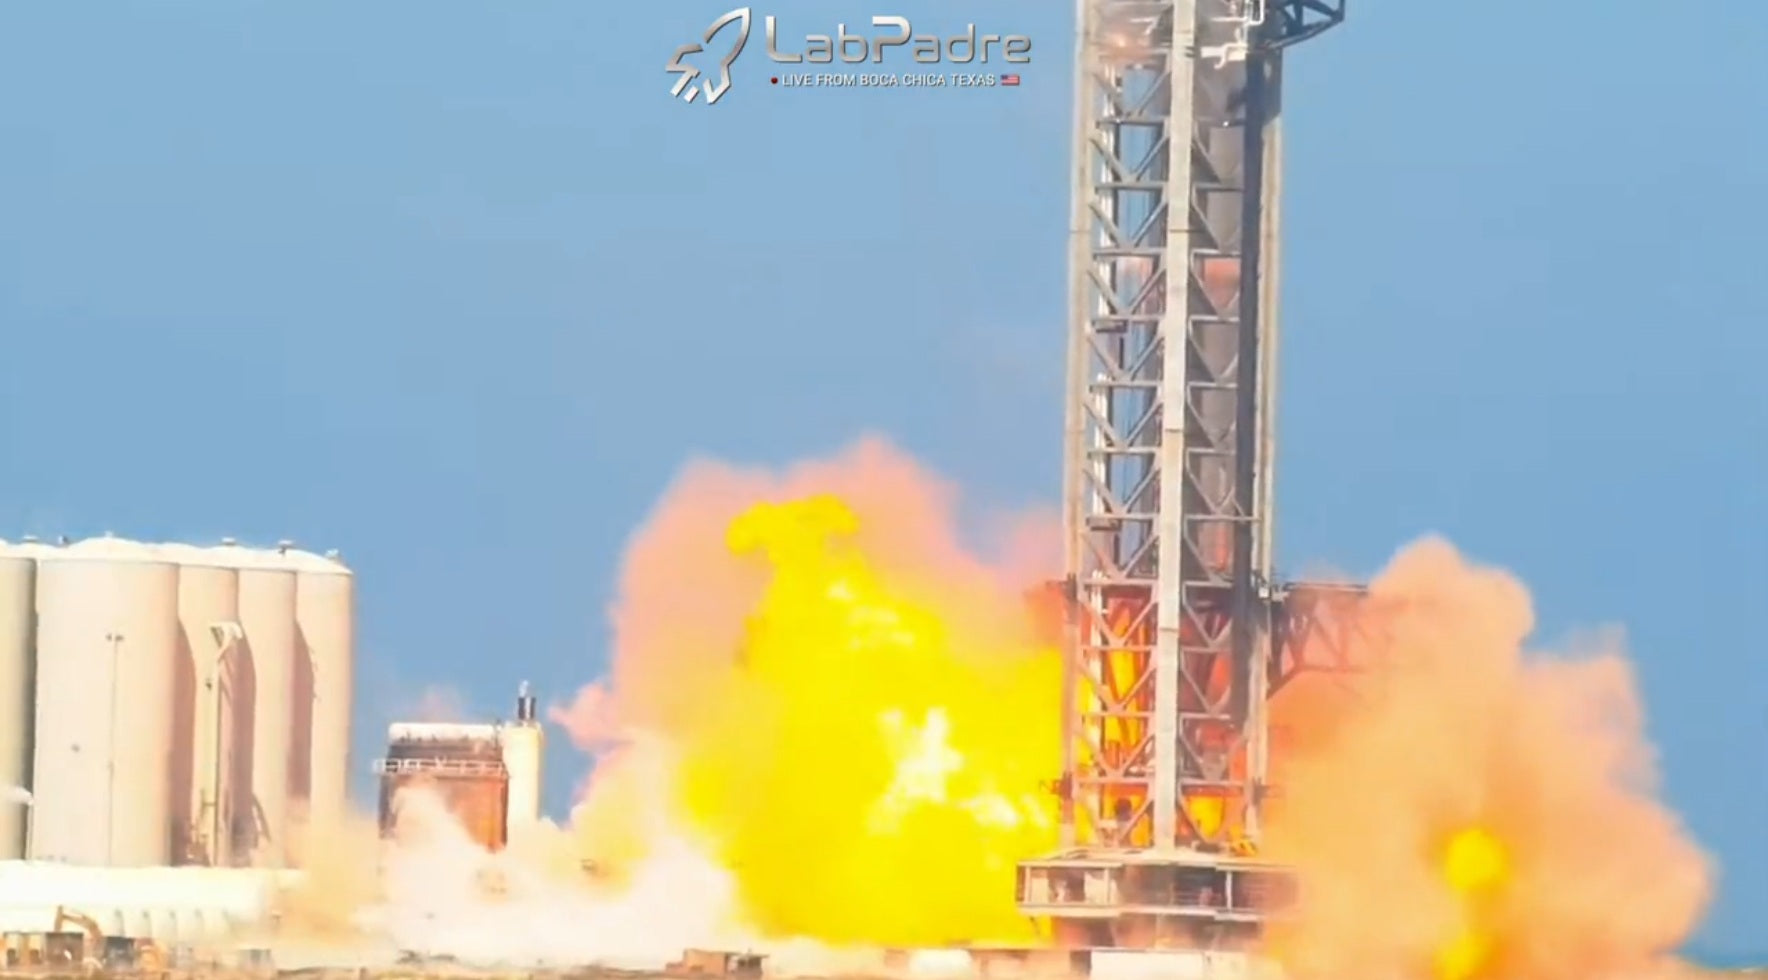 SpaceX Super Heavy Booster Engine Testing Ends With An Unexpected Blast